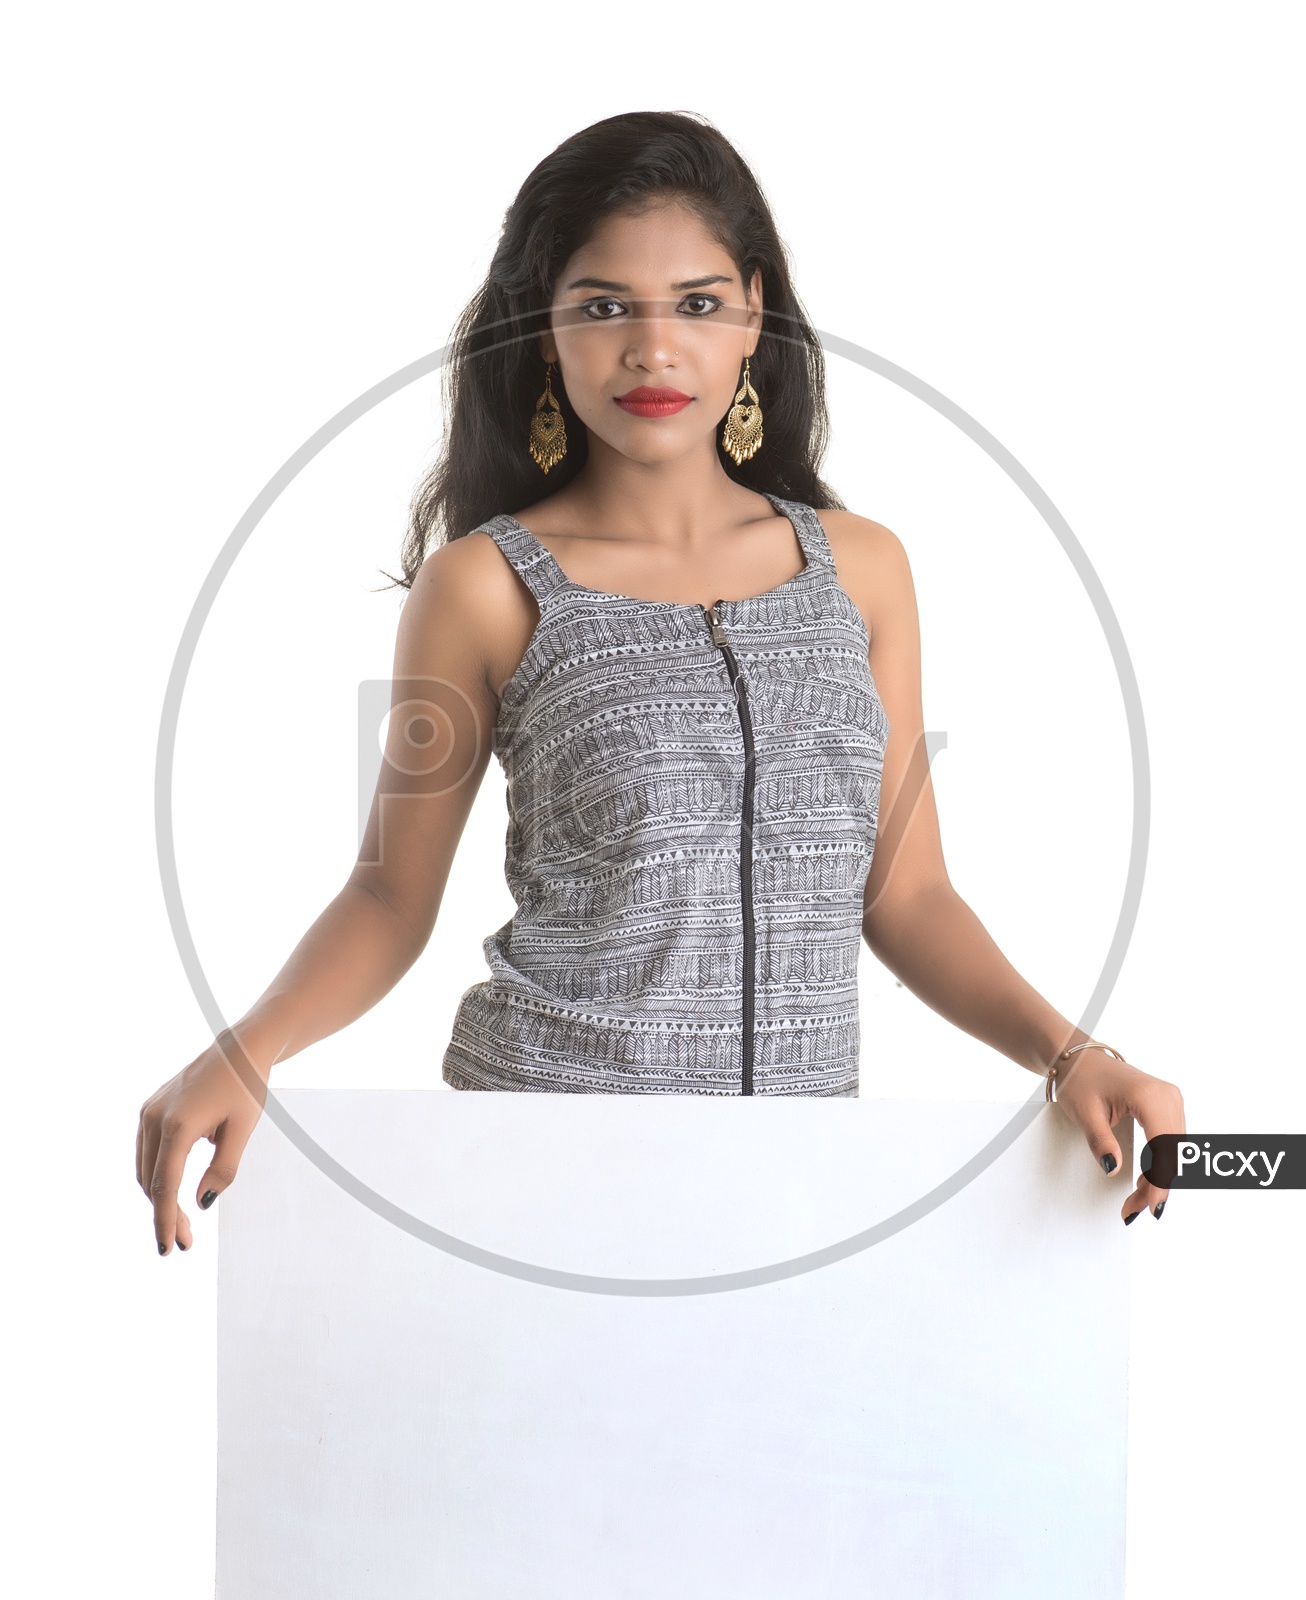 Indian woman holding a white board